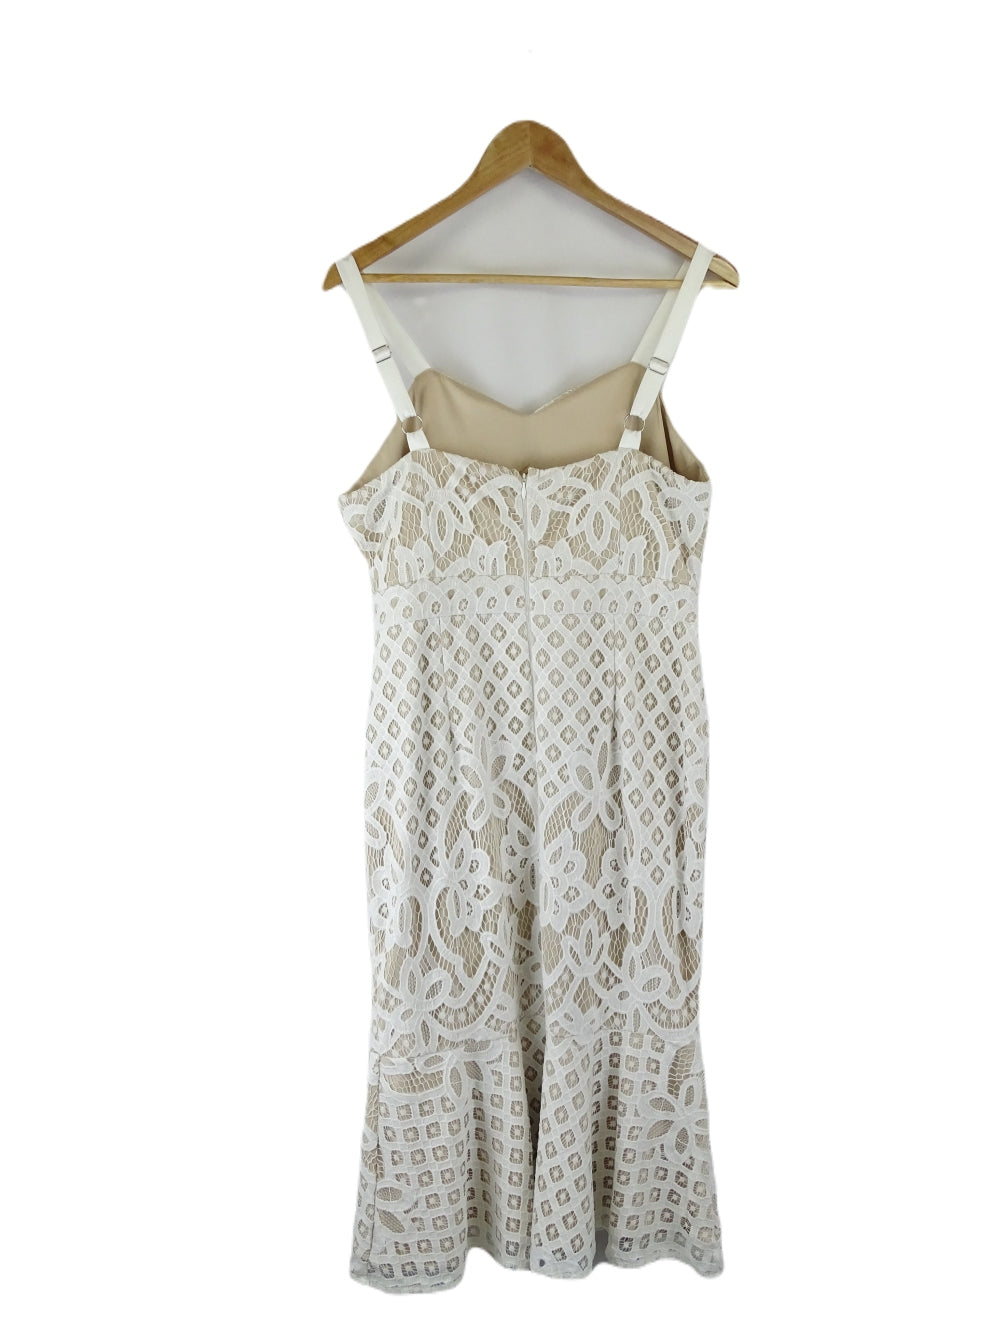 Two Sisters White Lace Dress 14